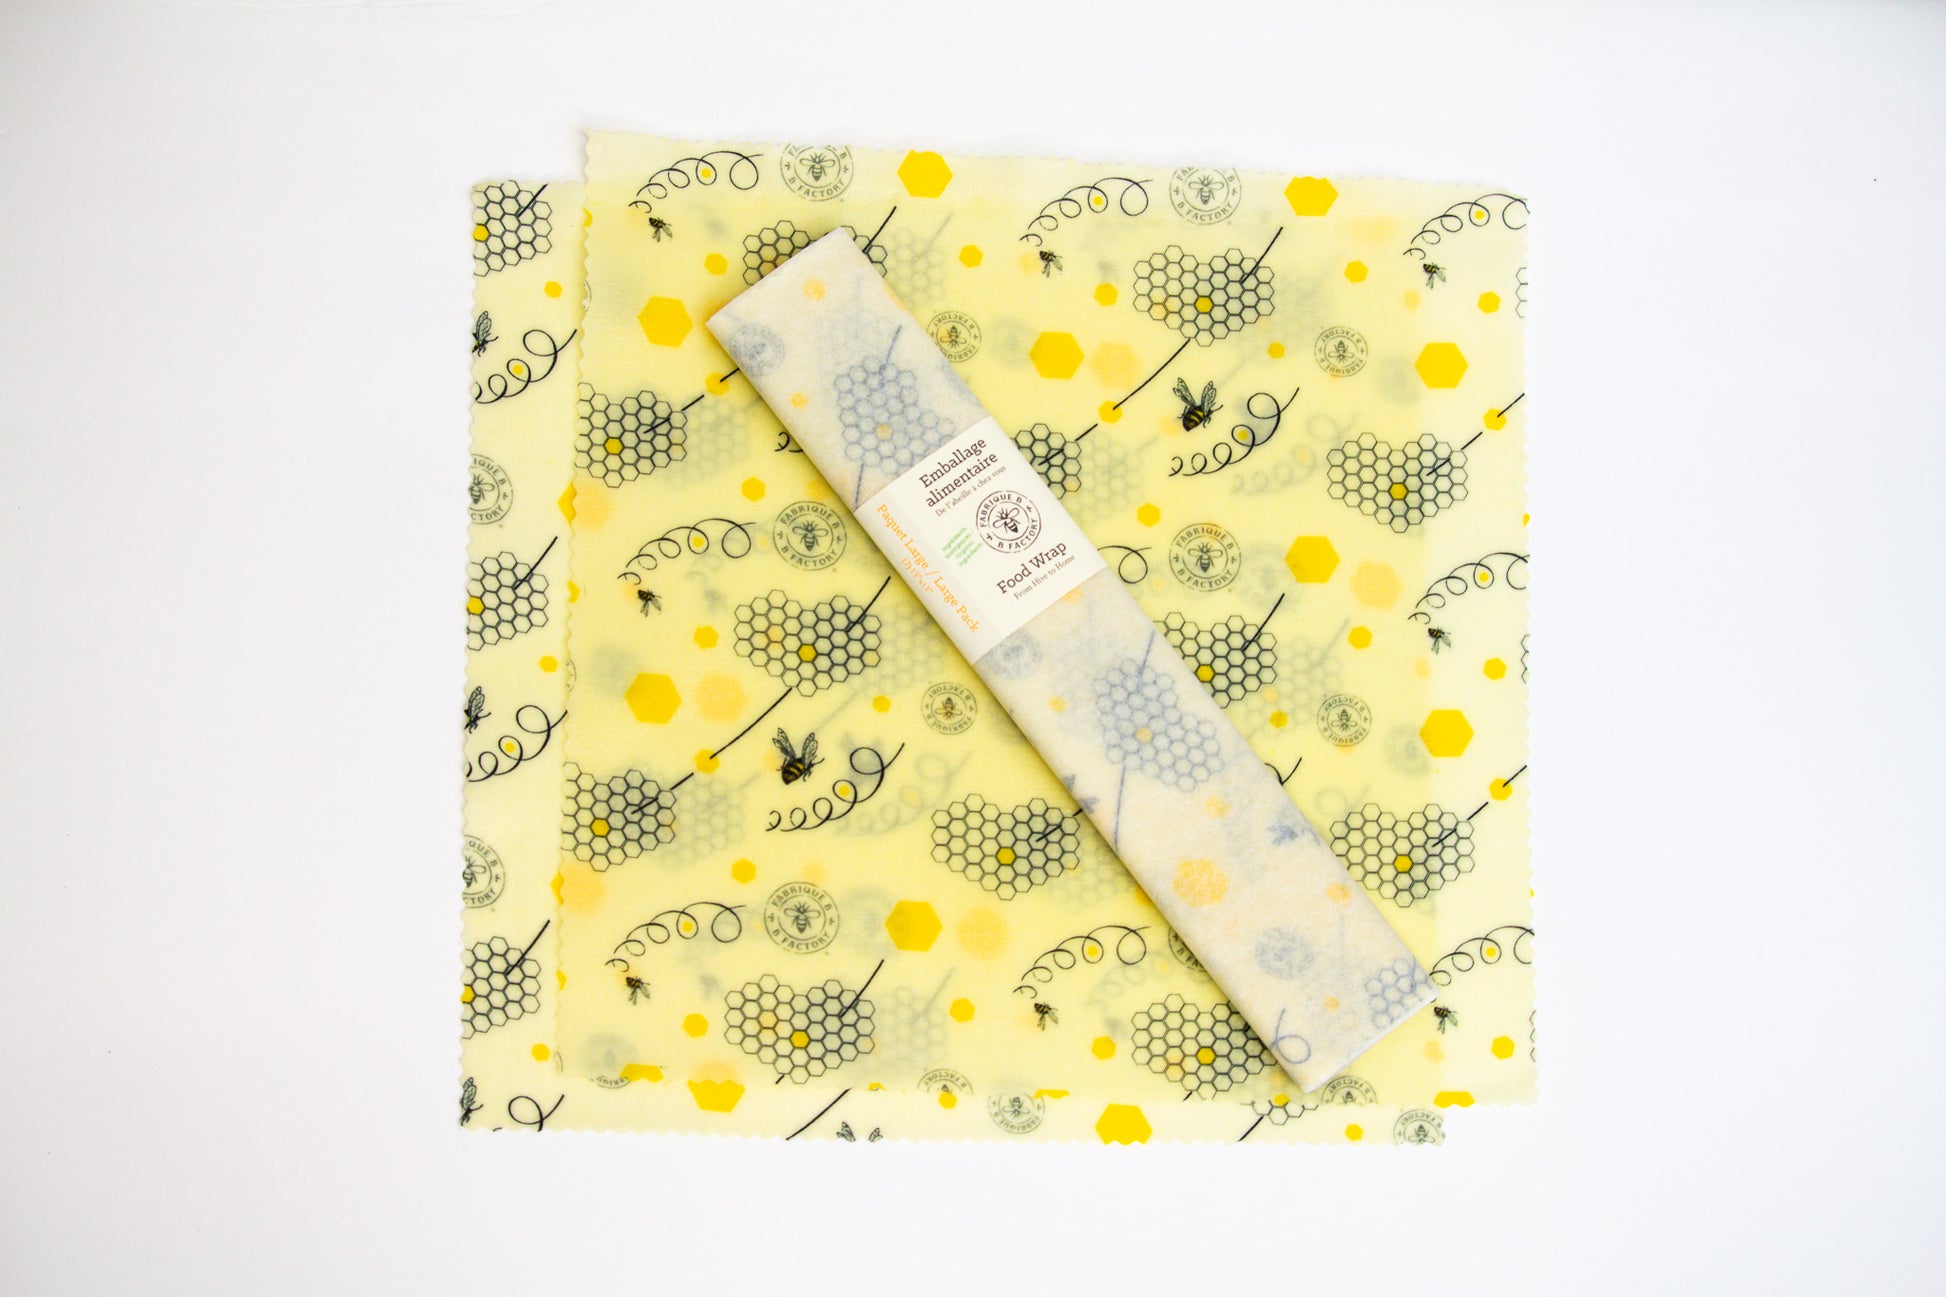 2 beeswax food wraps with honeycomb and bee pattern, with a wrapped set of 2 large beeswax wraps with B Factory logo sitting in middle